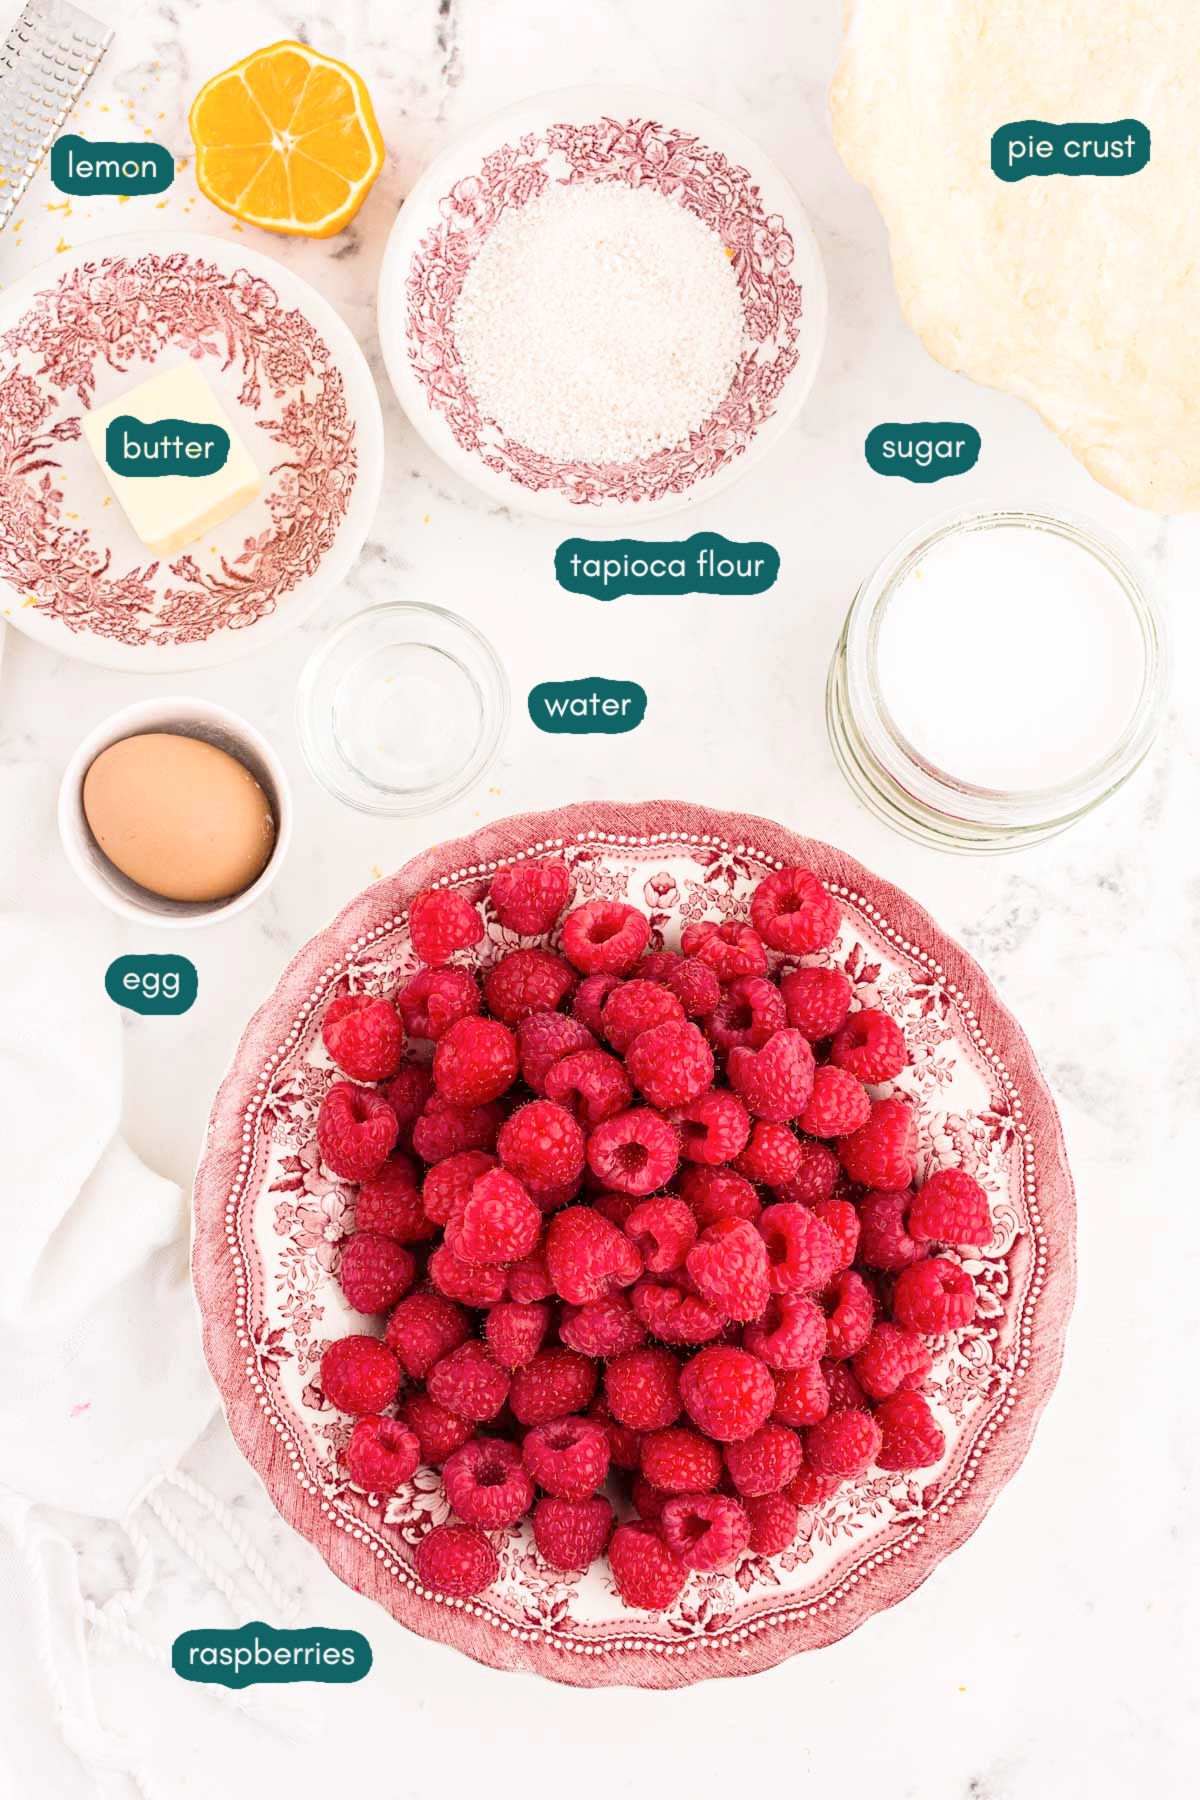 Ingredients for raspberry pie prepared on a white counter.